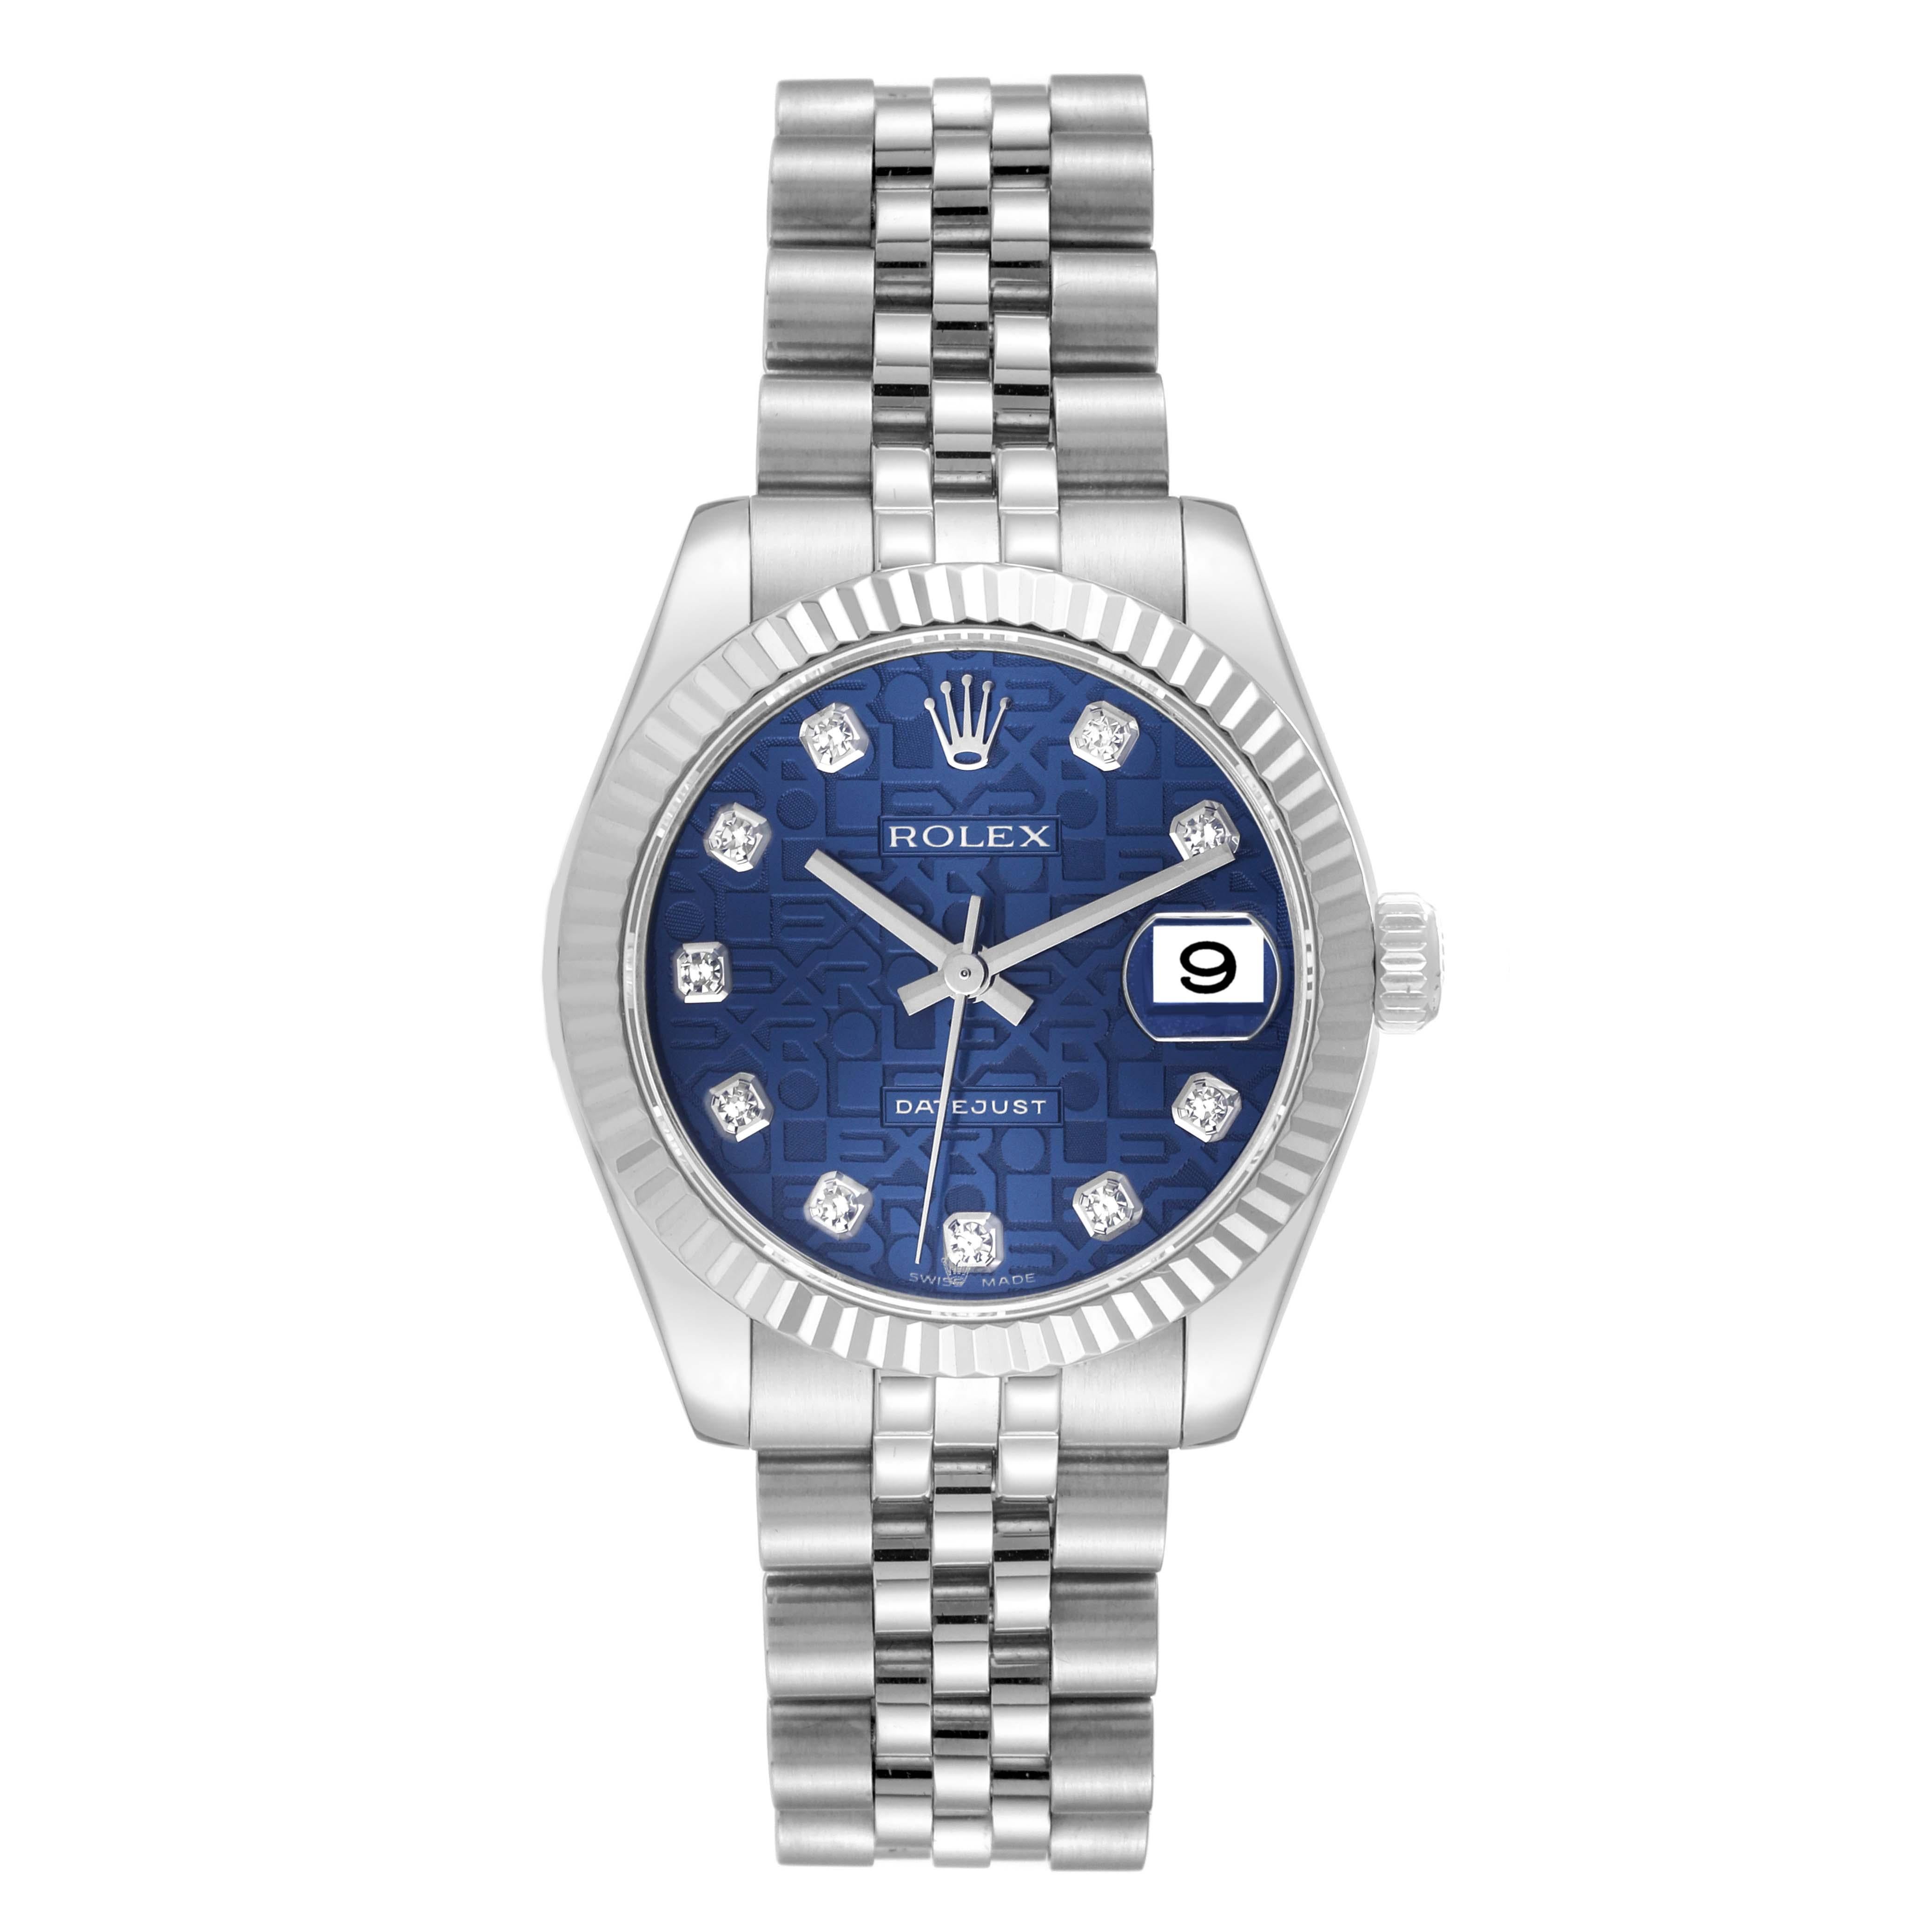 Rolex Datejust Midsize Steel White Gold Blue Diamond Dial Ladies Watch 178274 Box Card. Officially certified chronometer automatic self-winding movement. Stainless steel oyster case 31.0 mm in diameter. Rolex logo on the crown. 18k white gold fluted